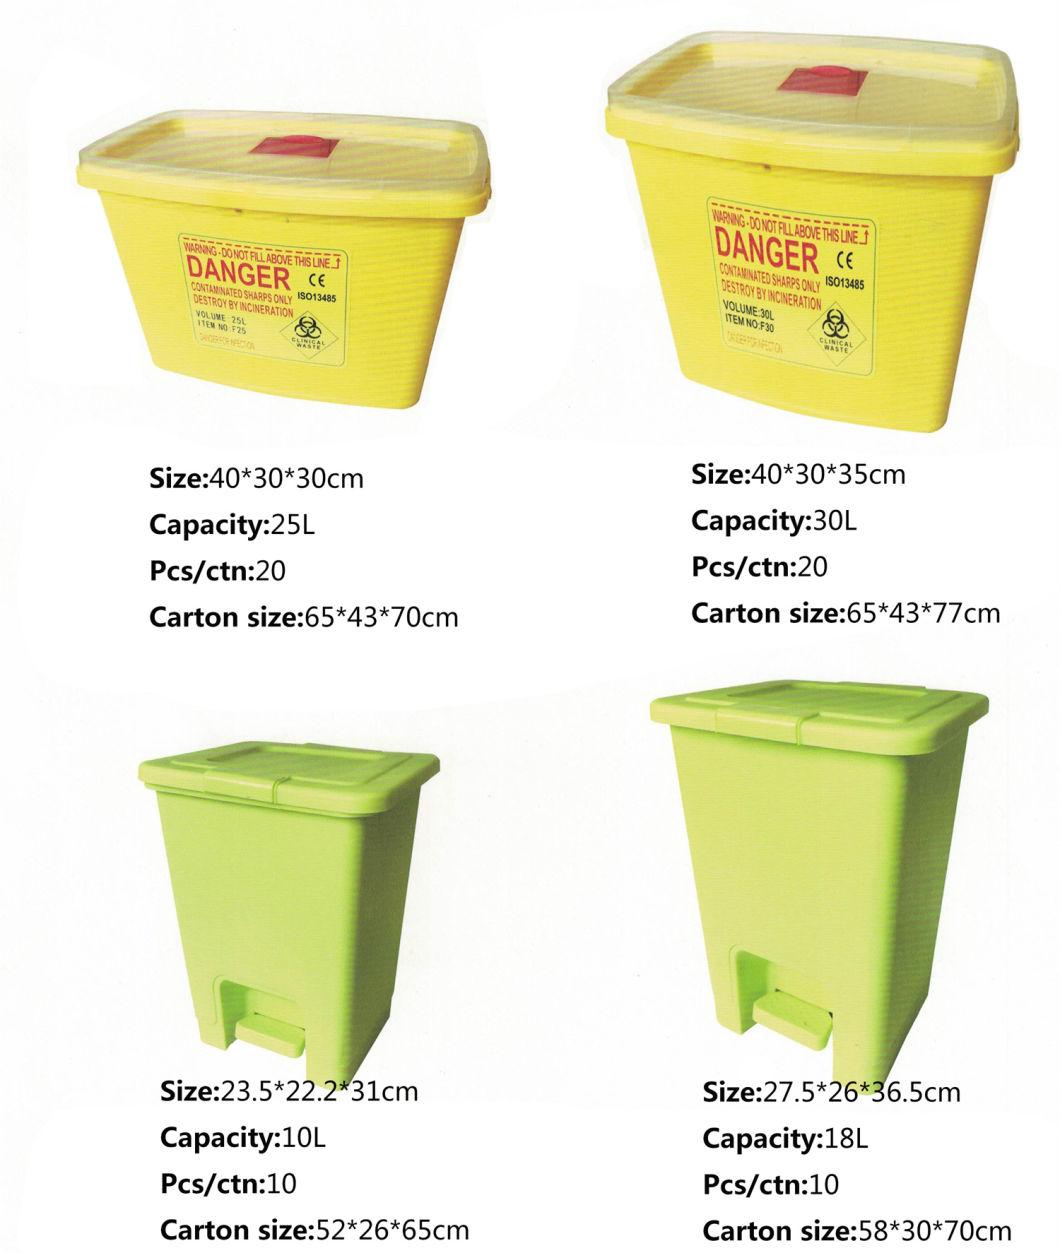 Disposable Box Biohazard Needle Disposal Medicalsharp Containers for Hospitaluse